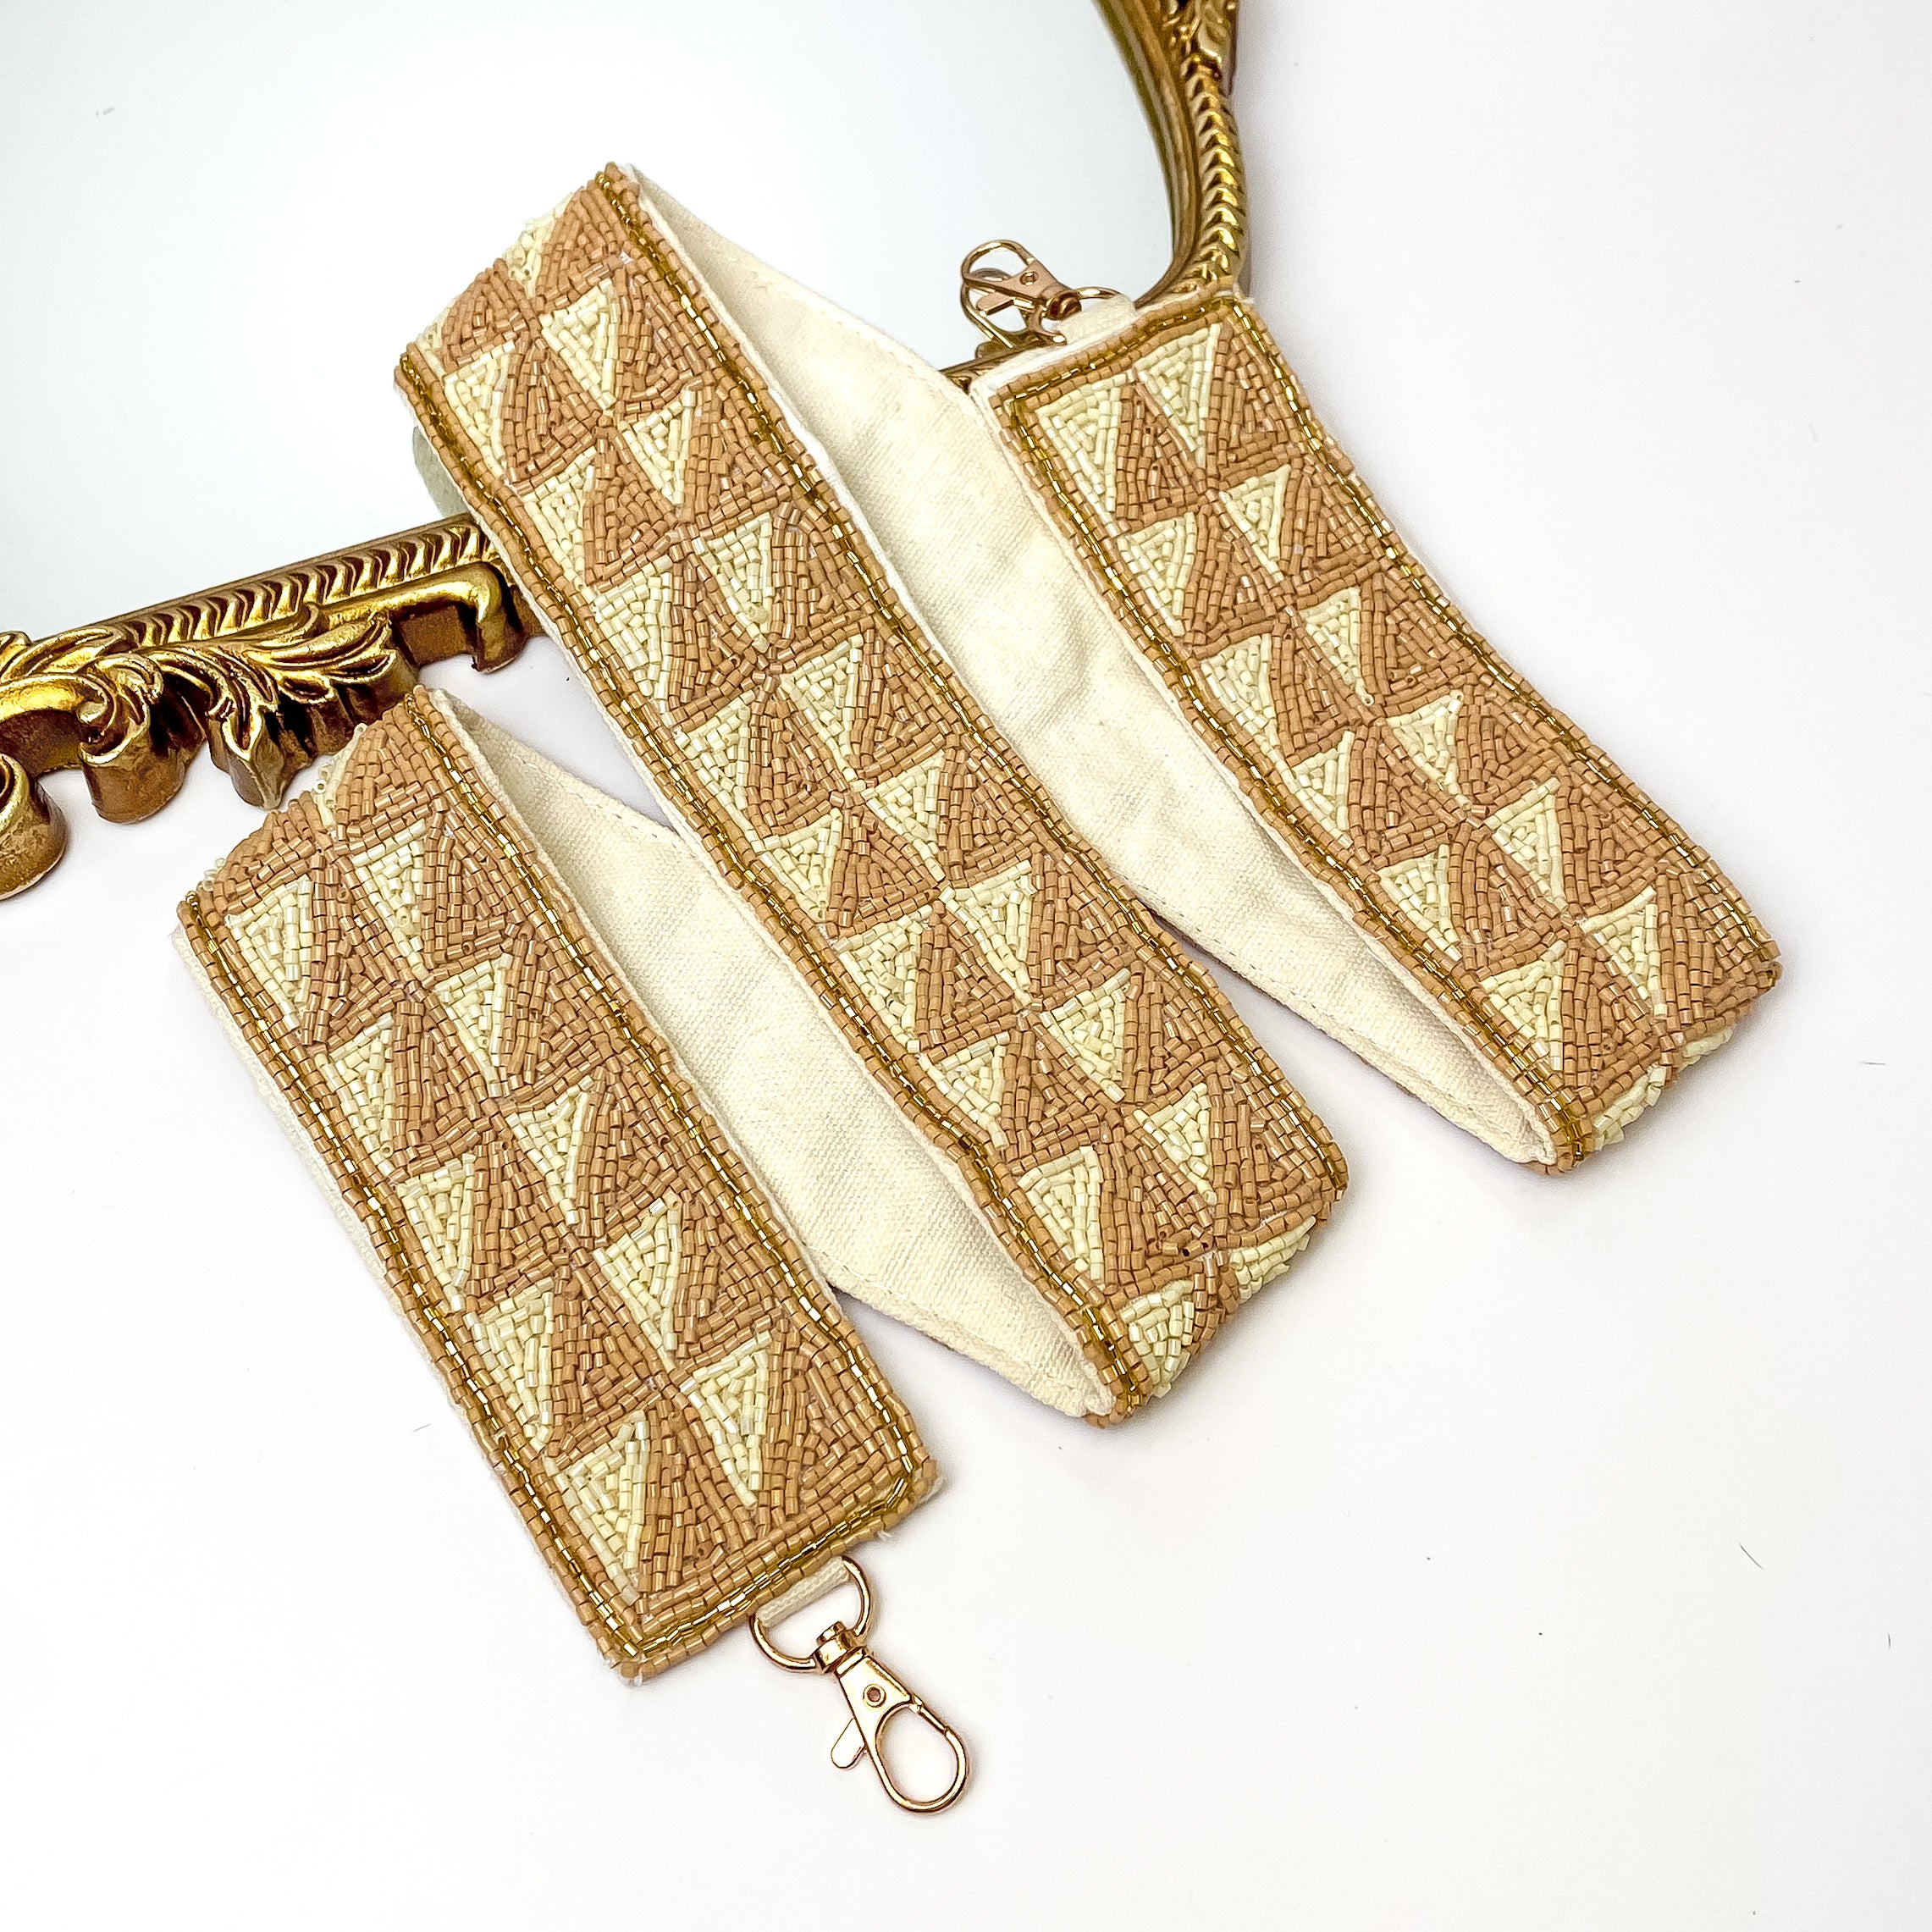 Beige and ivory beaded purse strap with gold hardware and triangle design. This purse strap is pictured partially laying on a gold mirror on a white background. 